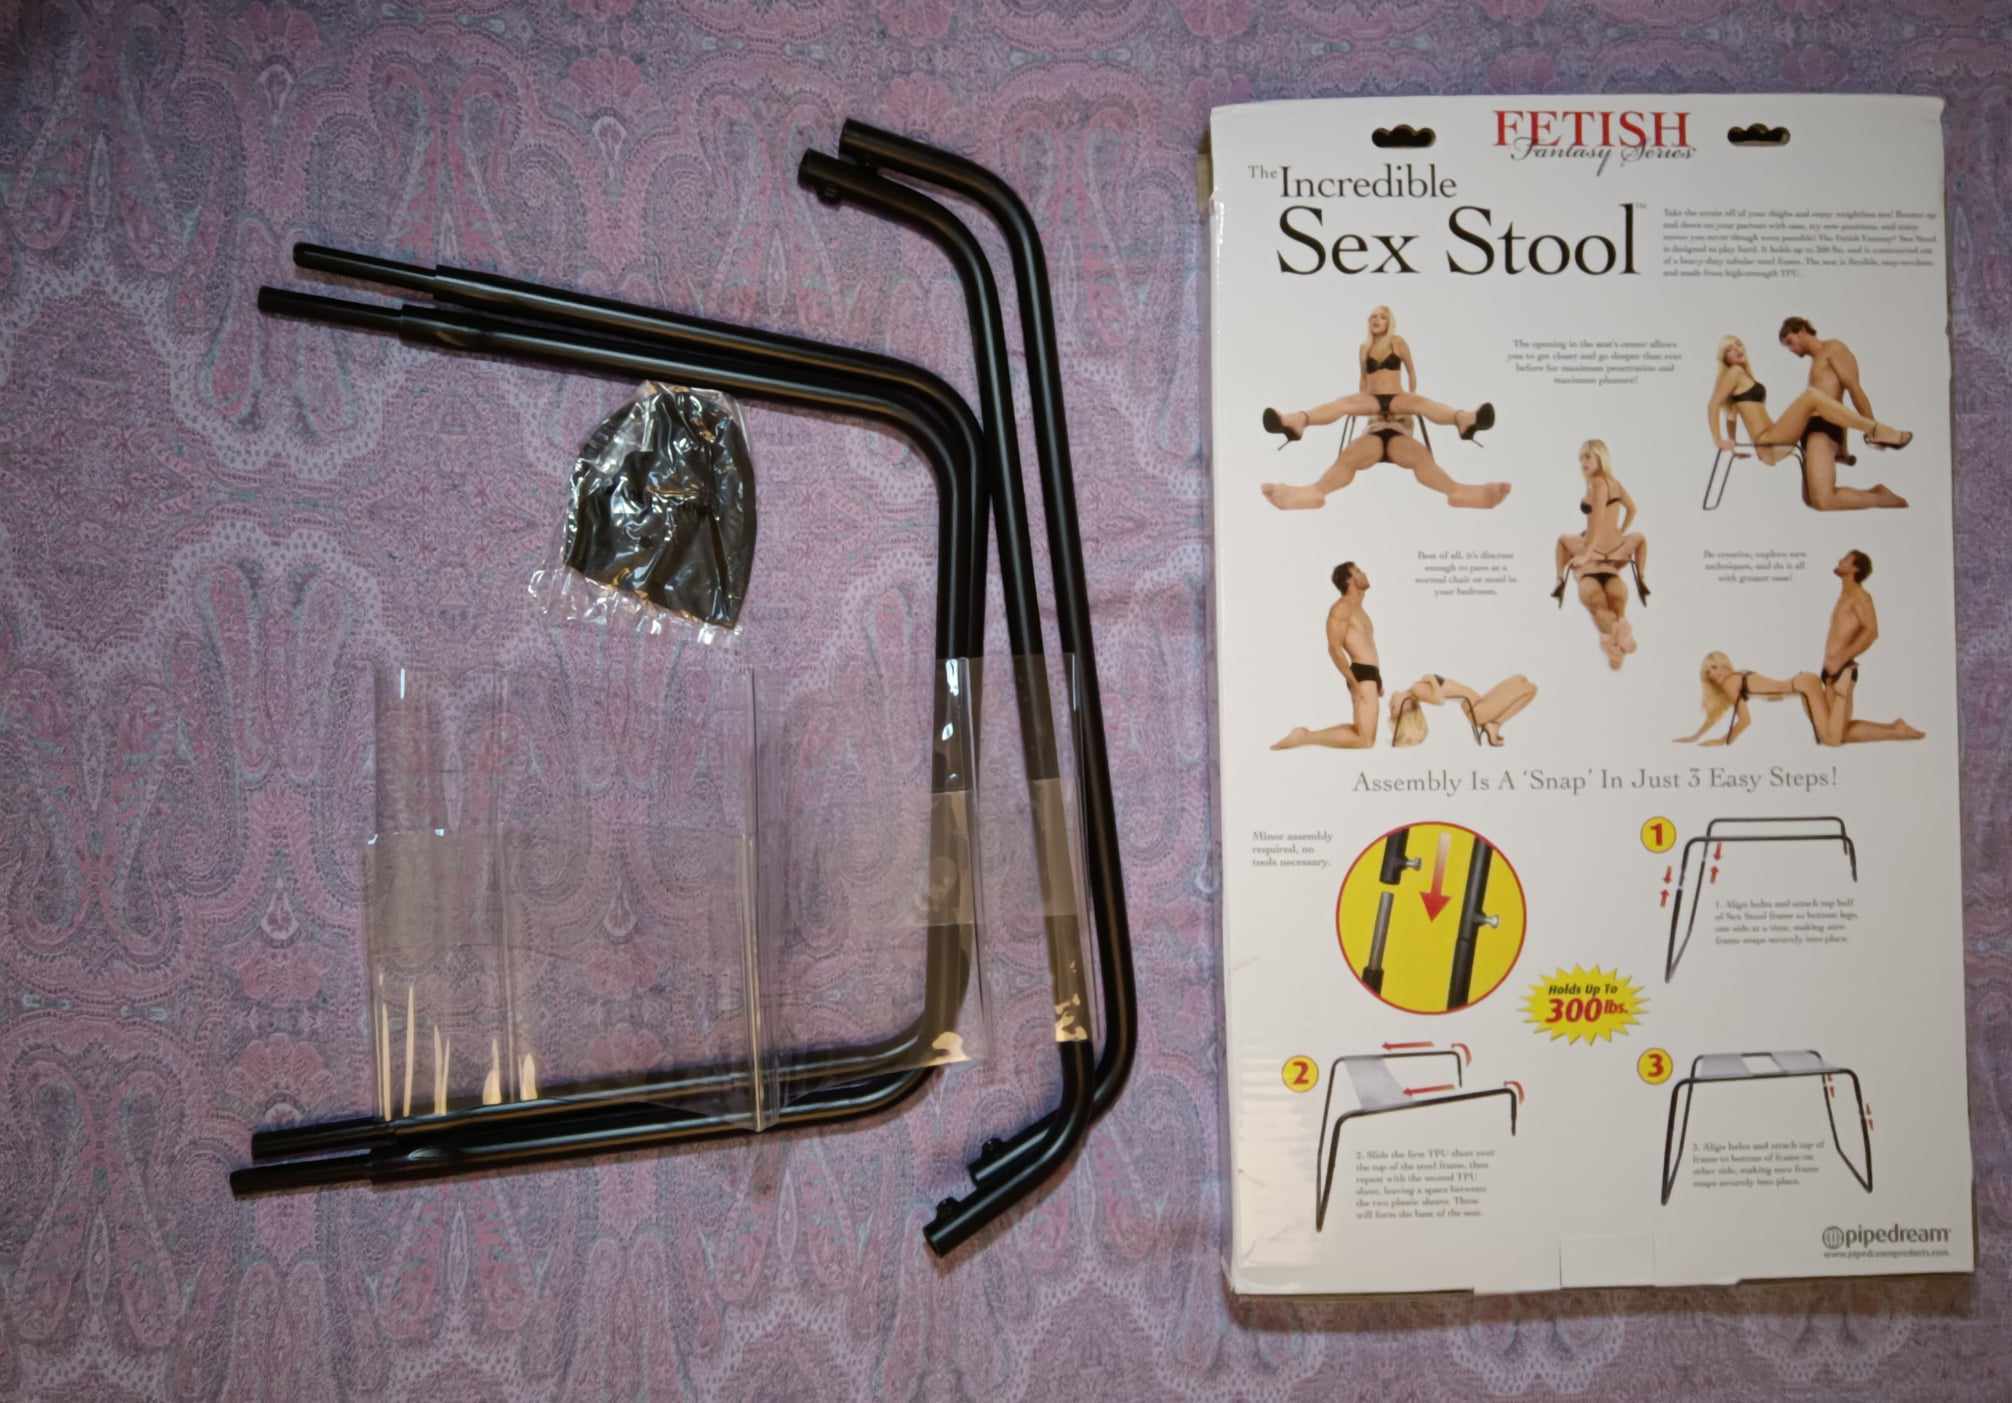 Fetish Fantasy Incredible Sex Stool Analyzing the Packaging: First Impressions